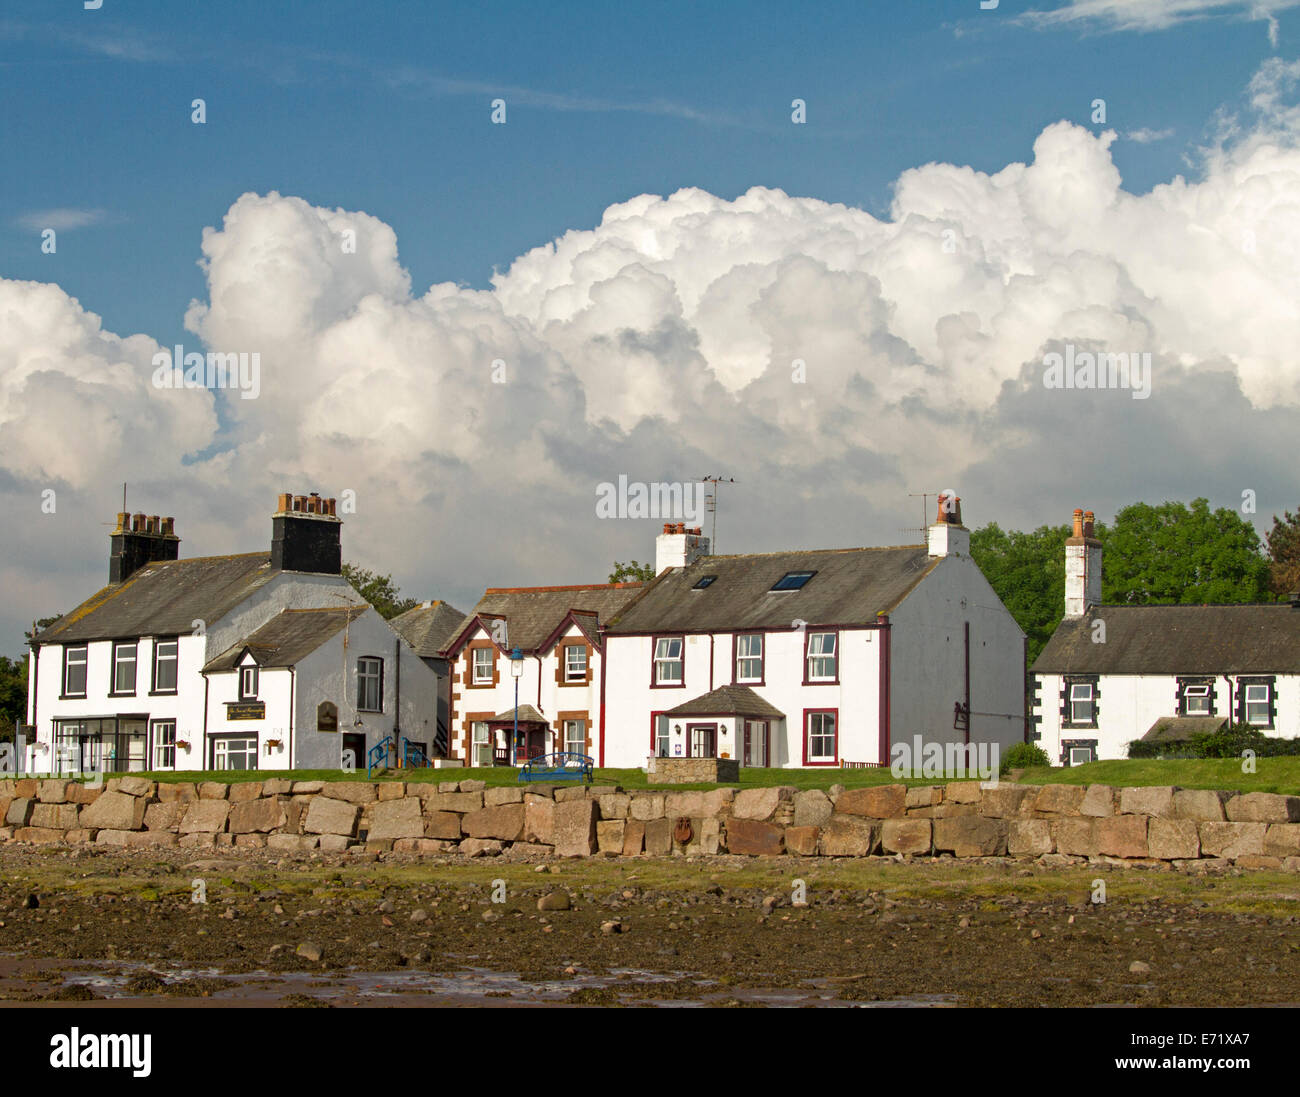 Traditional beachfront houses and sea wall with storm clouds in blue sky at coastal village of Ravenglass, Cumbria, England Stock Photo